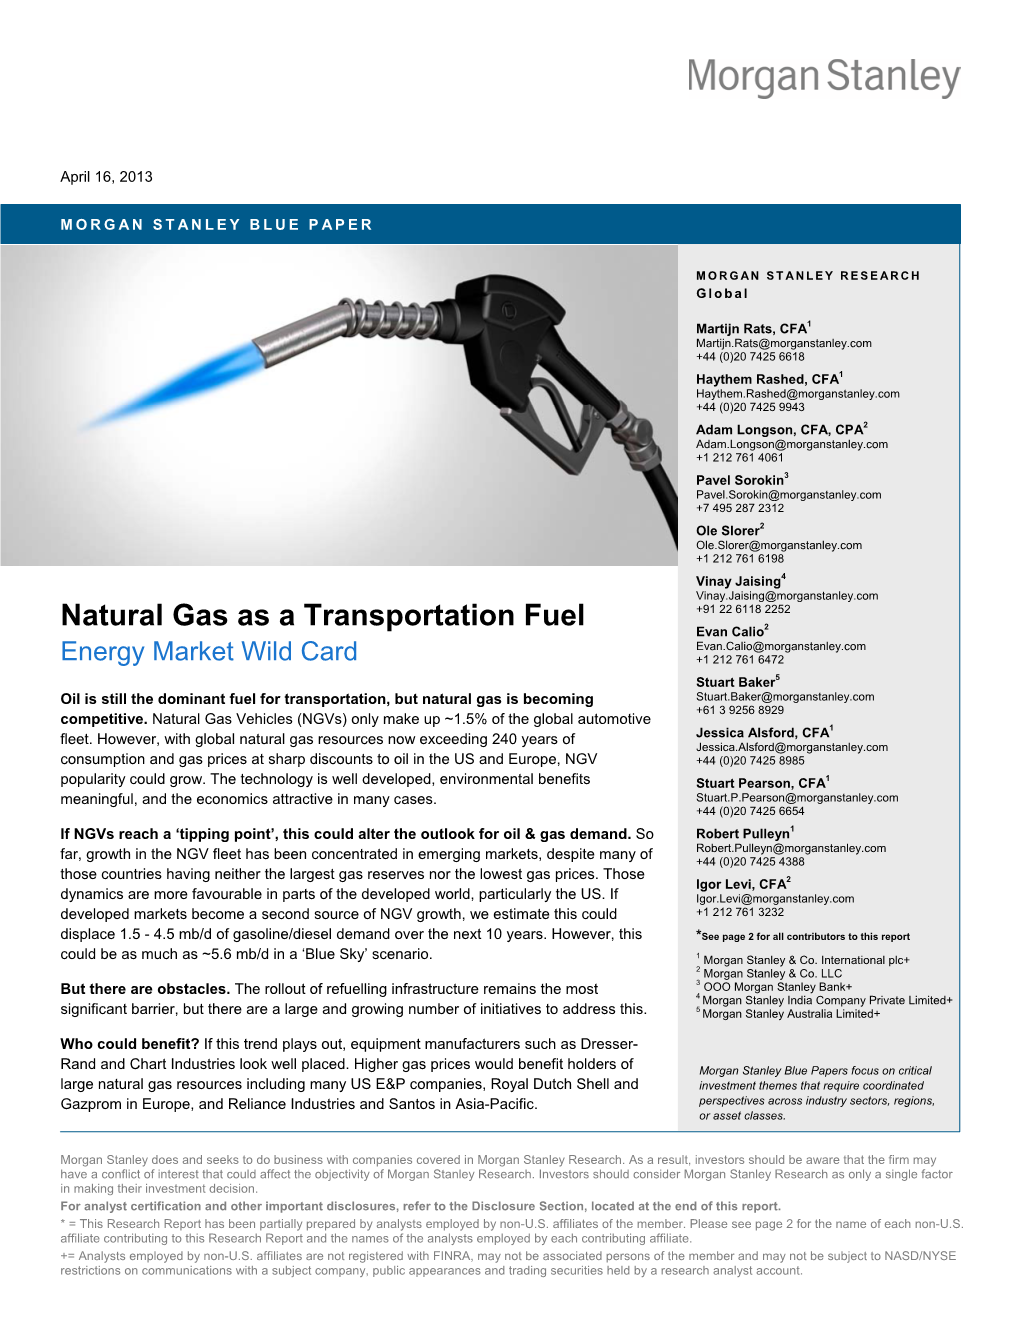 Natural Gas As a Transportation Fuel